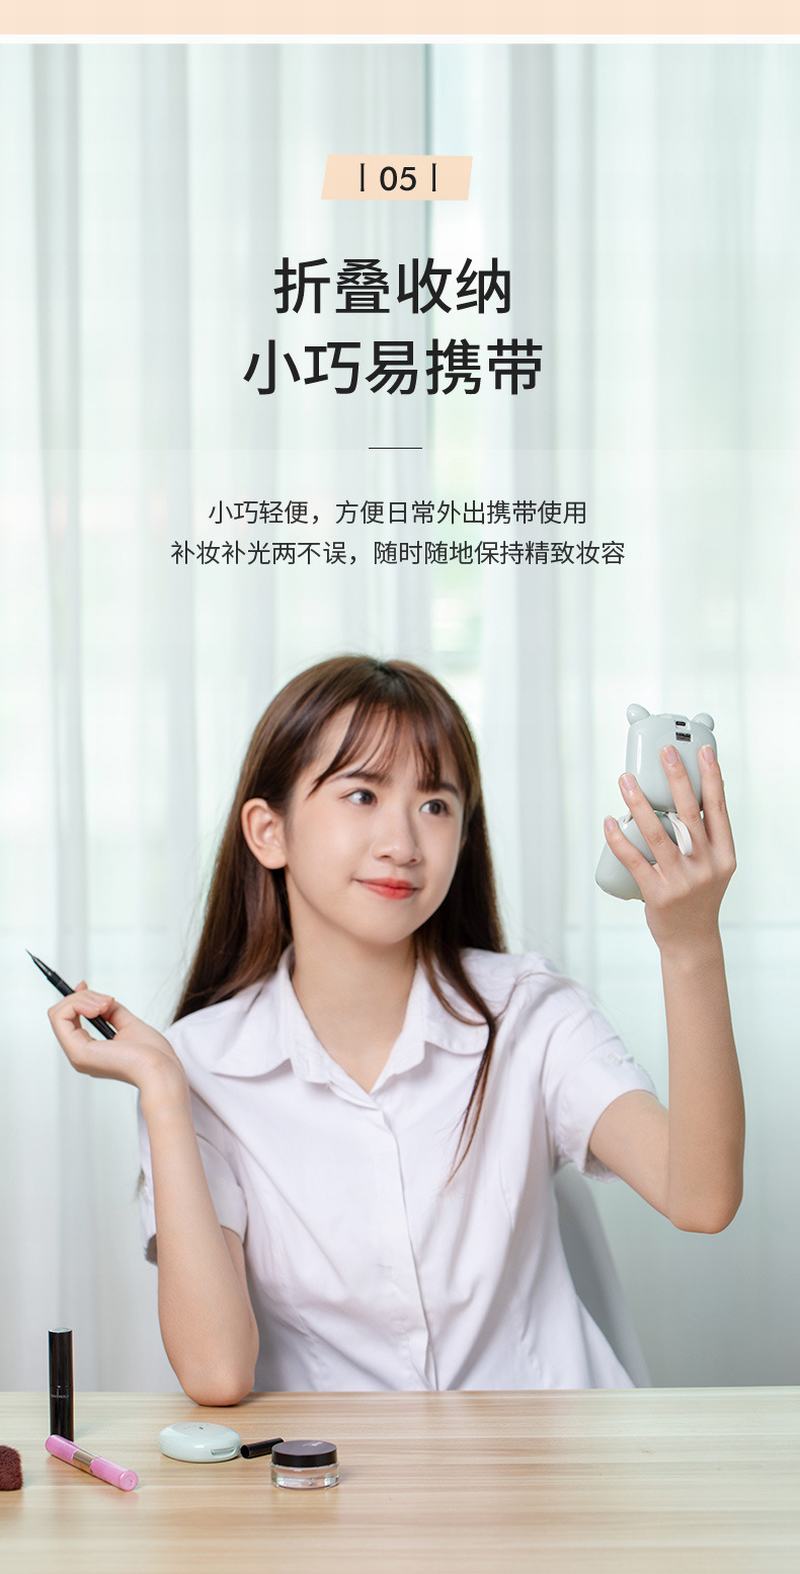 Tiktok new product makeup battery pack battery self charting line